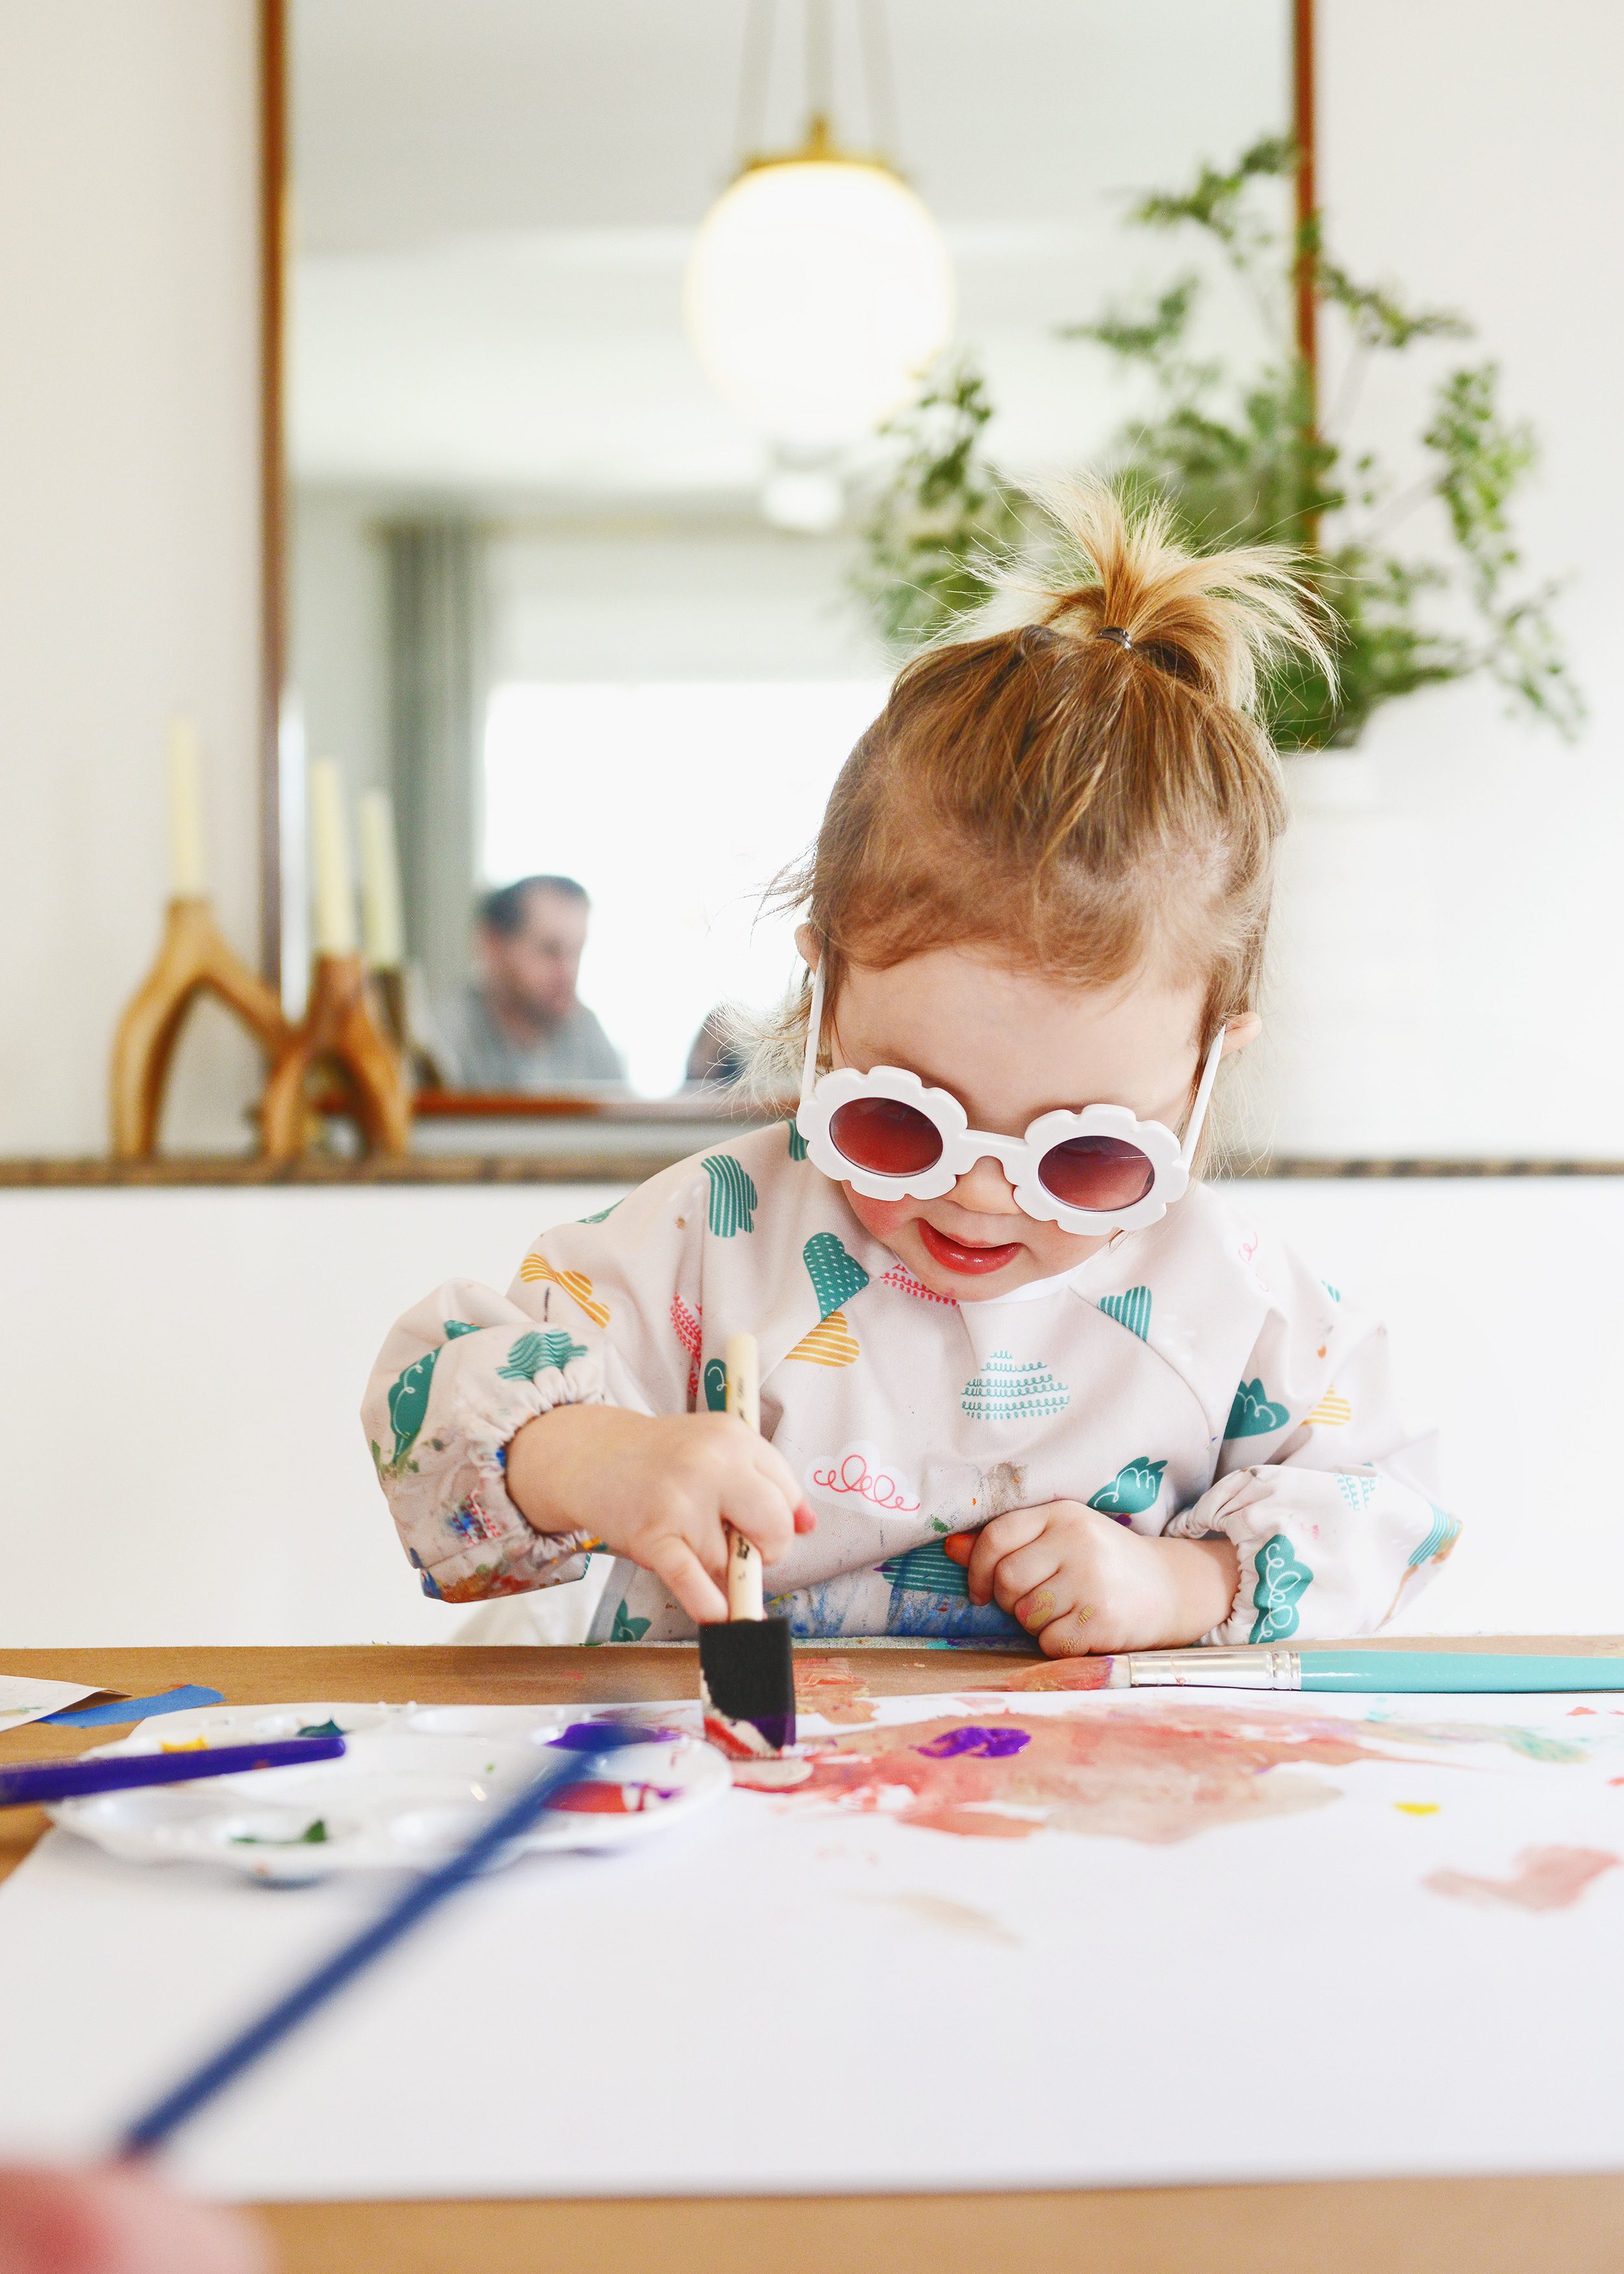 Lucy using a foam brush to make her painting | How to have a successful family art party! via Yellow Brick Home